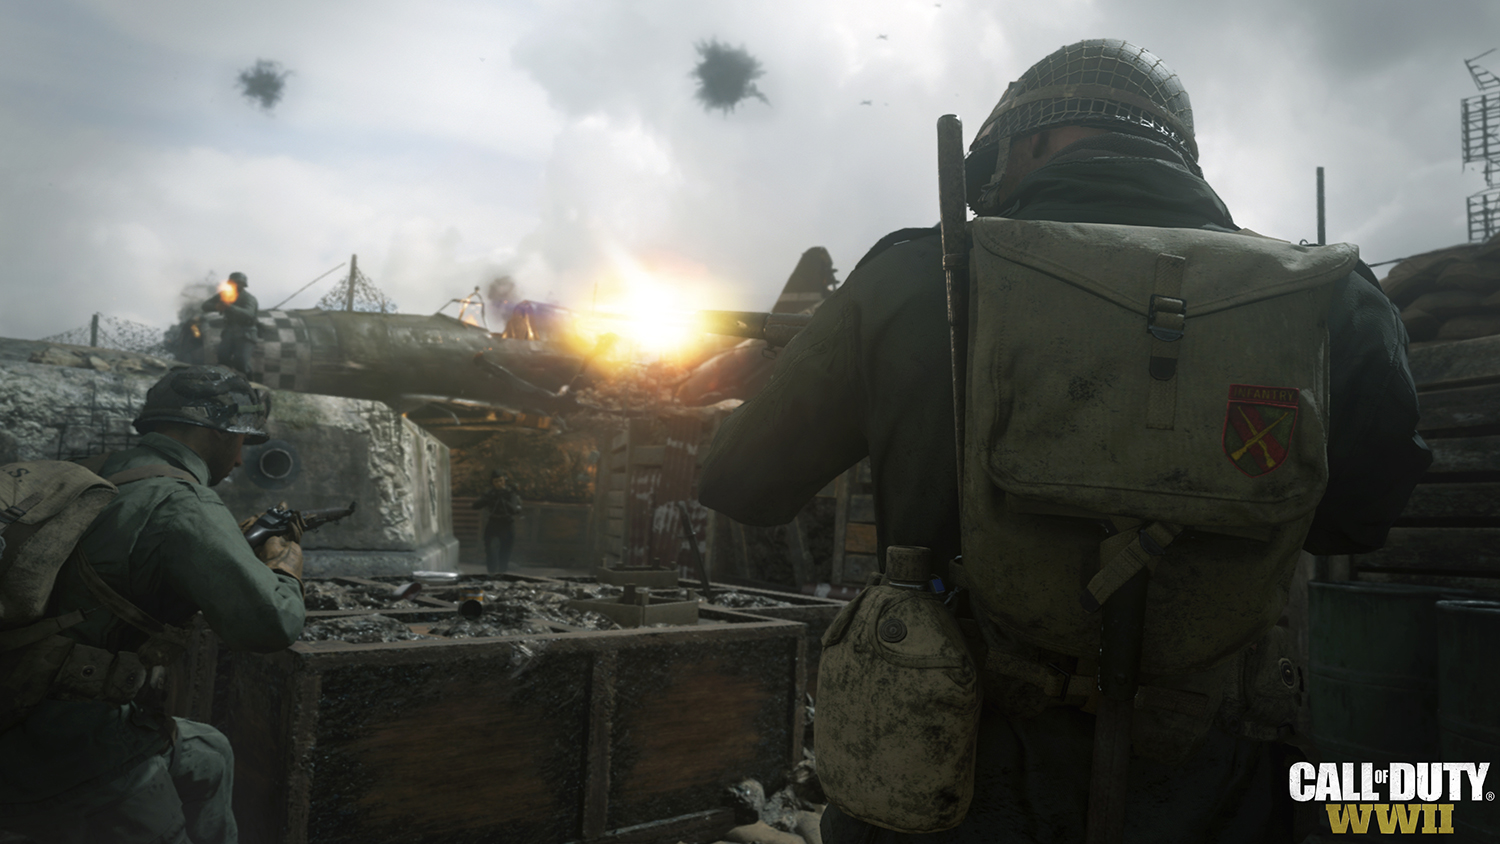 Everything You Need to Know About the Multiplayer Beta for Call of